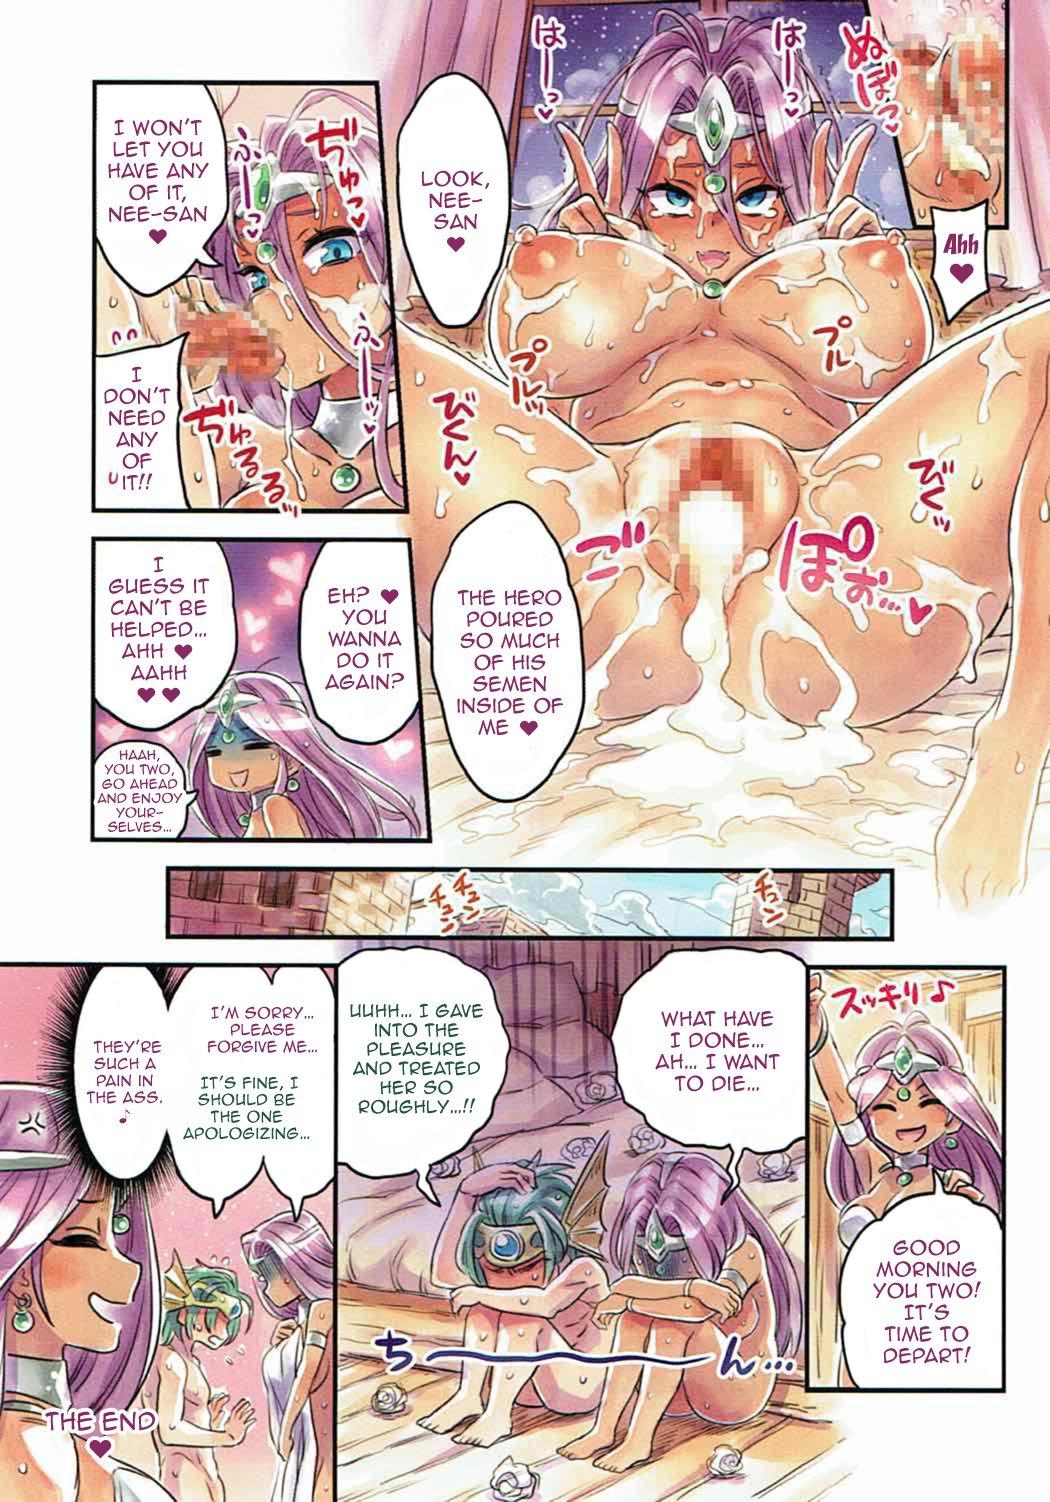 Hot Brunette (C89) [Mimoneland (Mimonel)] Nakama to Issen Koechau Hon ~DQ Hen~ | A Book About Crossing The Line With Companions ~DQ Edition~ (Dragon Quest) [English] {Doujins.com} - Dragon quest Gay Bang - Page 8